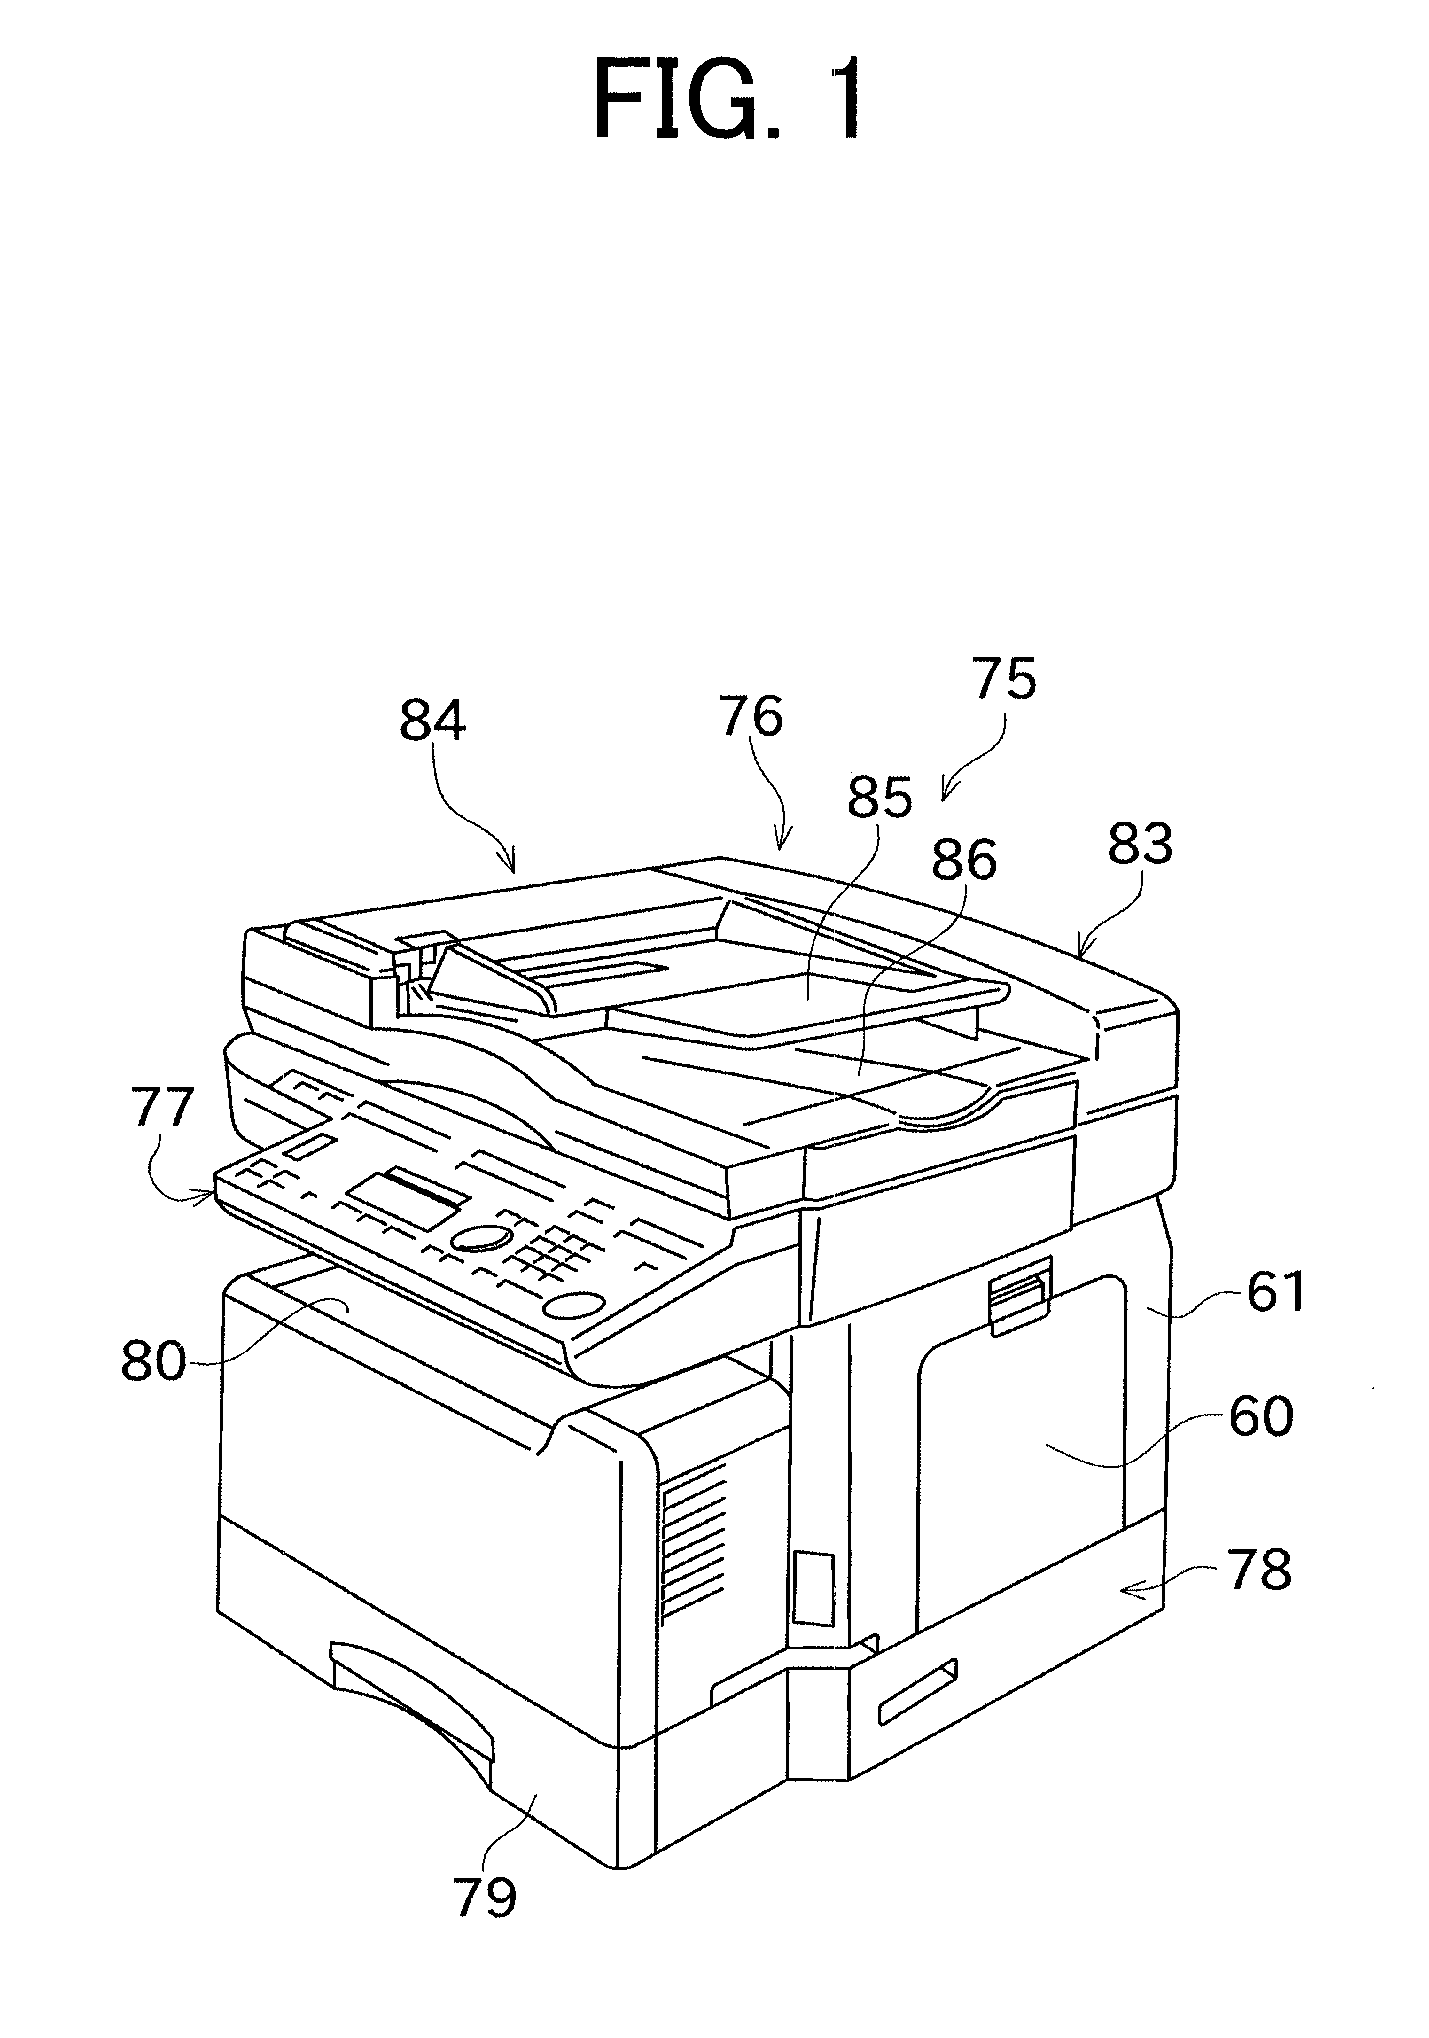 Image forming device with open/close cover and manual paper feeding tray